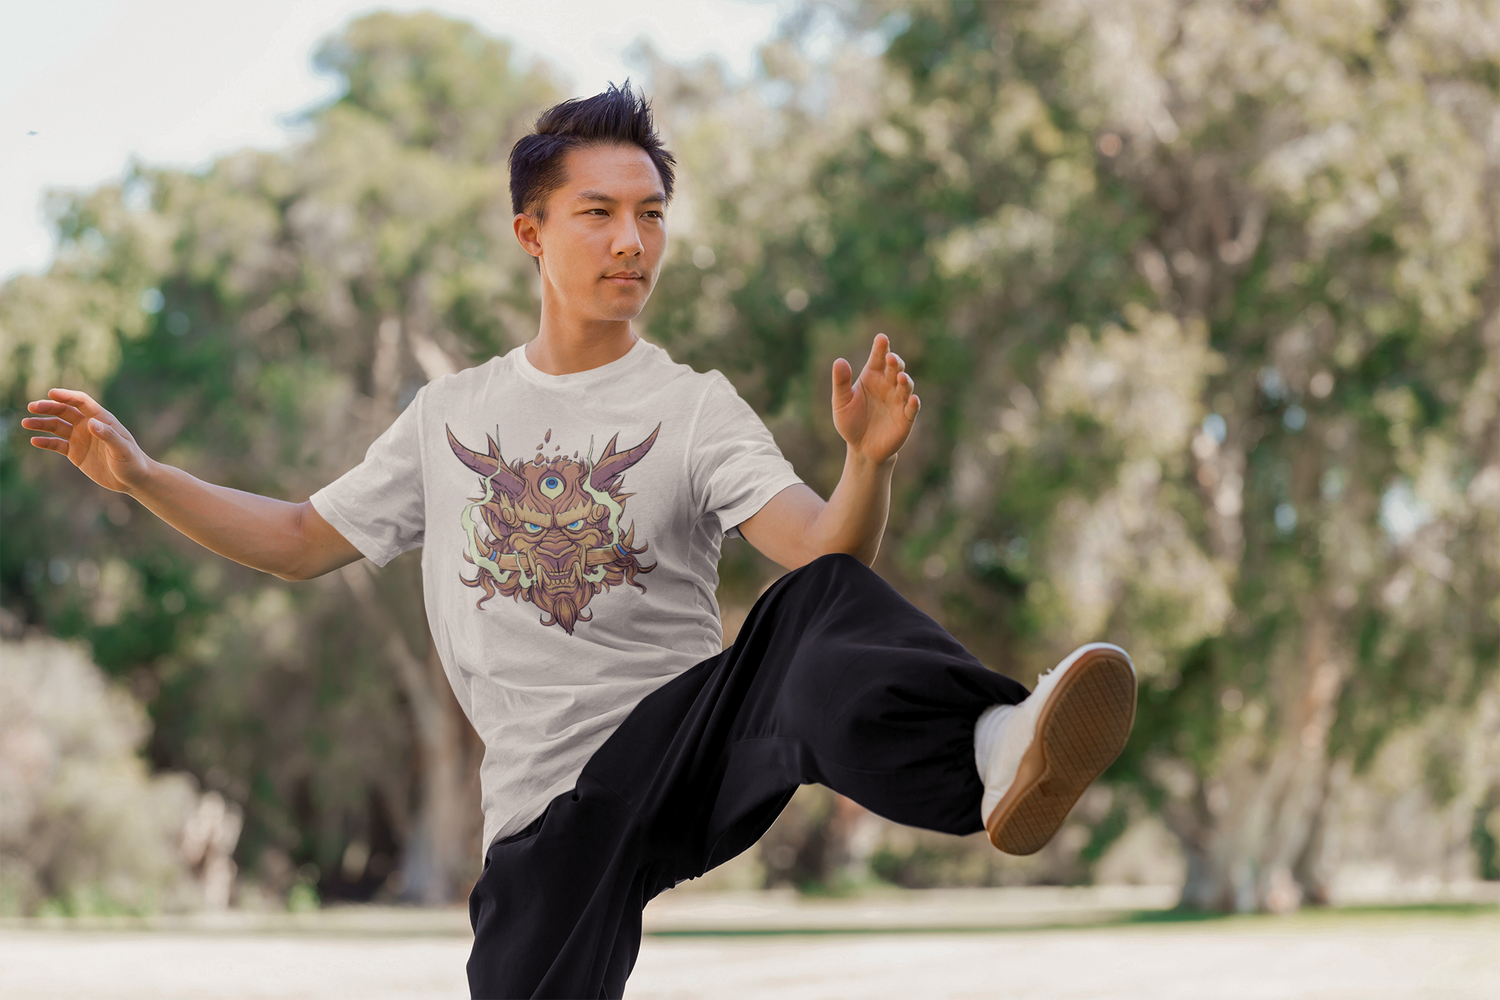 Kung-fu practitioner kicking with oni shirt on